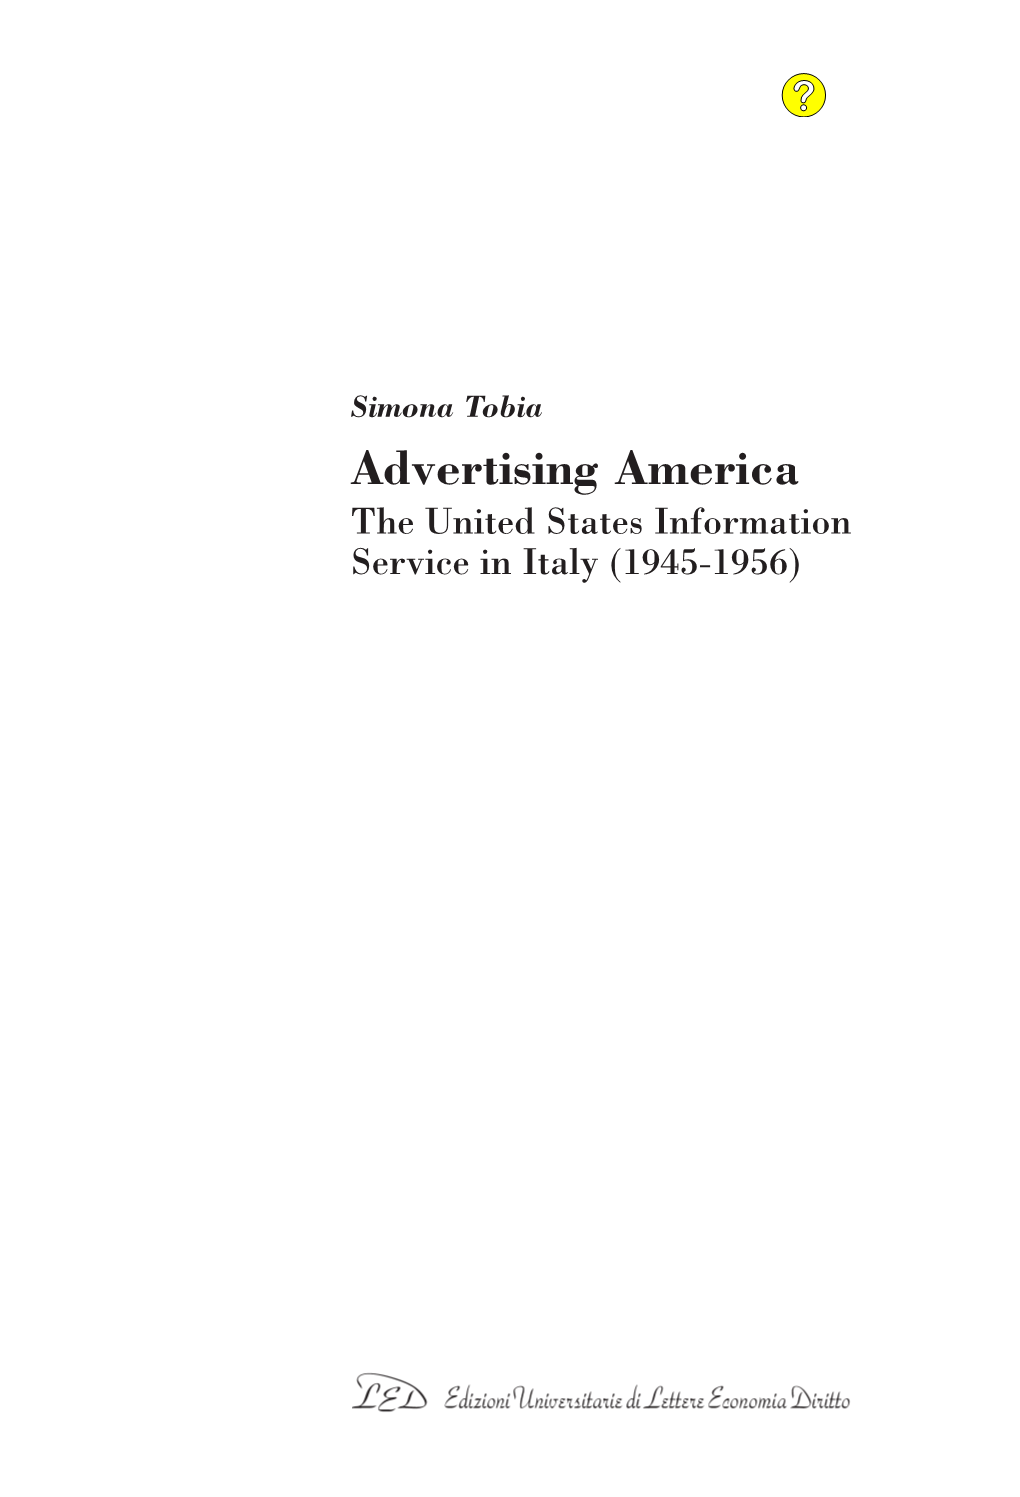 Advertising America. the United States Information Service in Italy